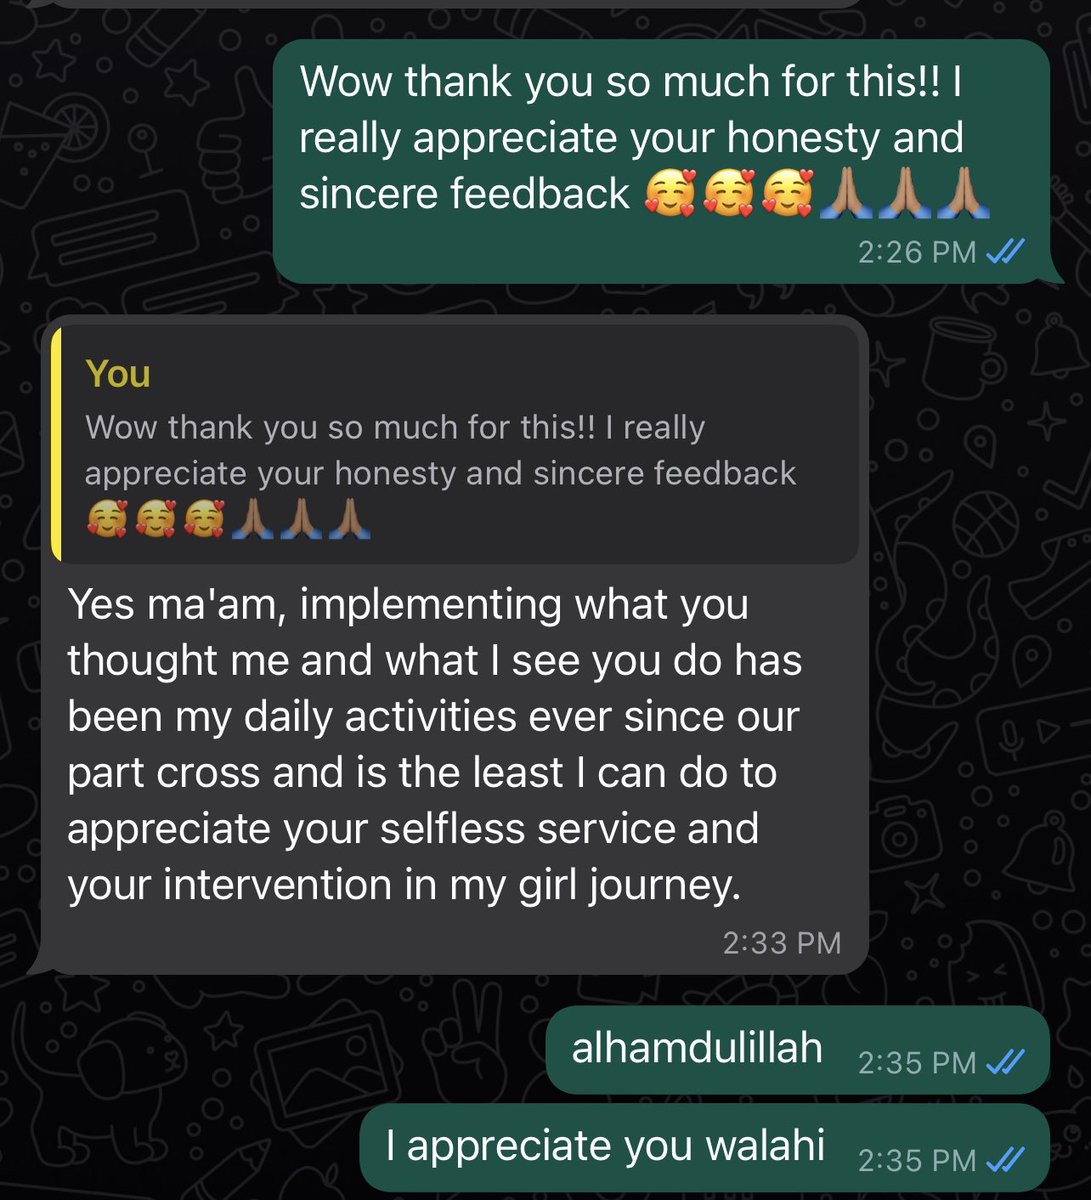 Messages that make me feel Rich in my soul. May Allah accept it as an act of Ibadah for me Amin 🤲🏽🤲🏽

#parentingautism #muslimautismmom #autismparentcoach